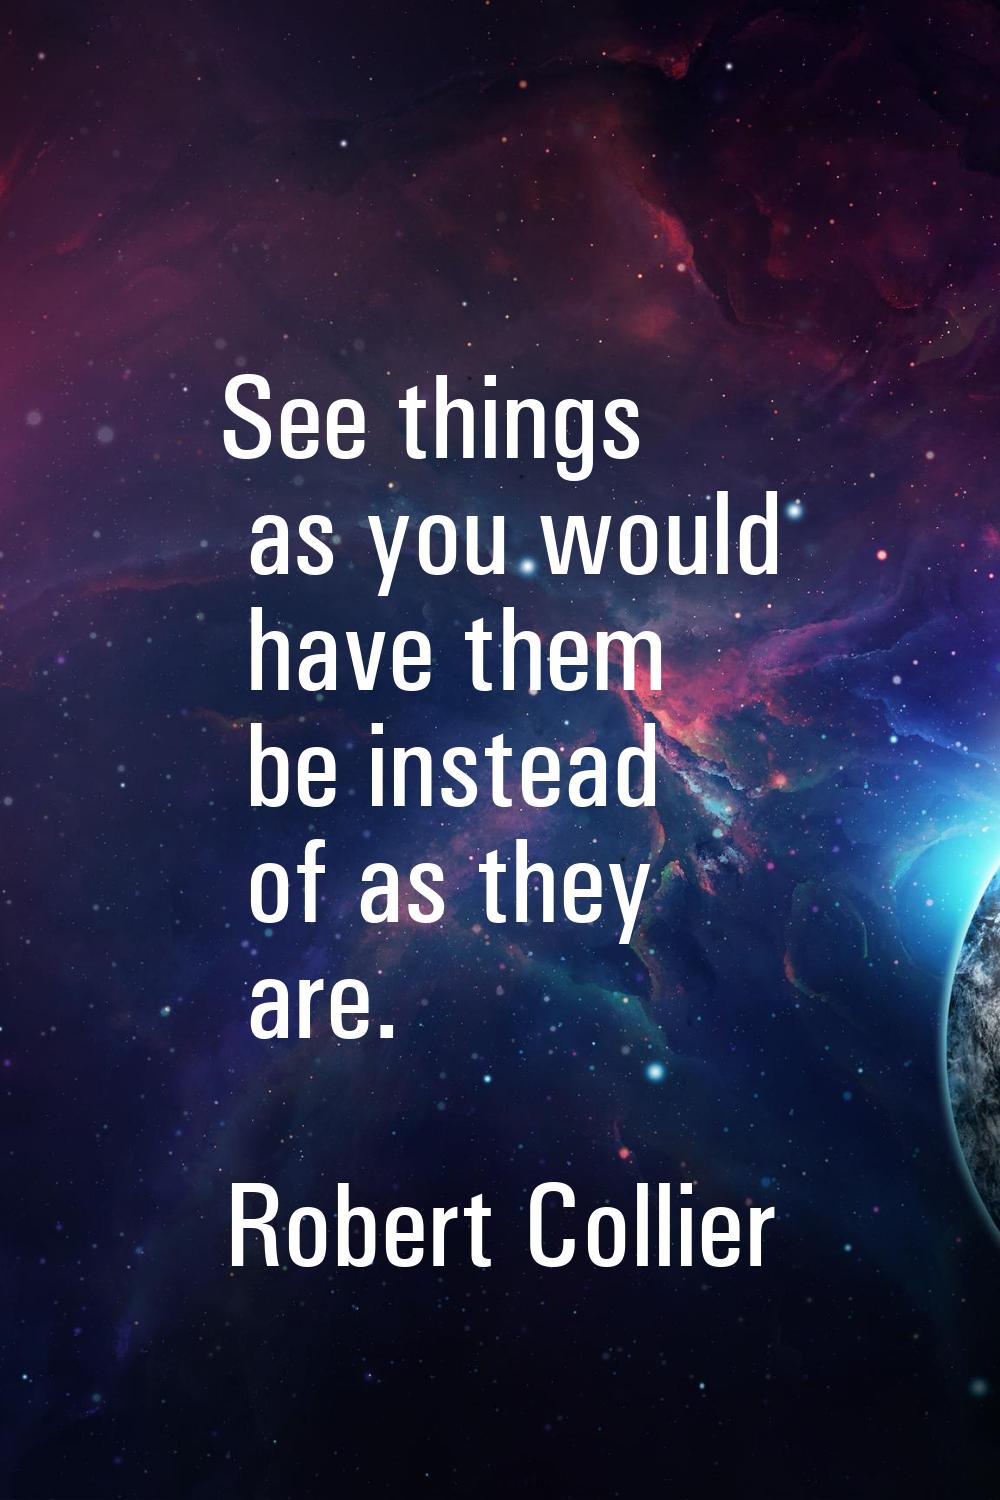 See things as you would have them be instead of as they are.